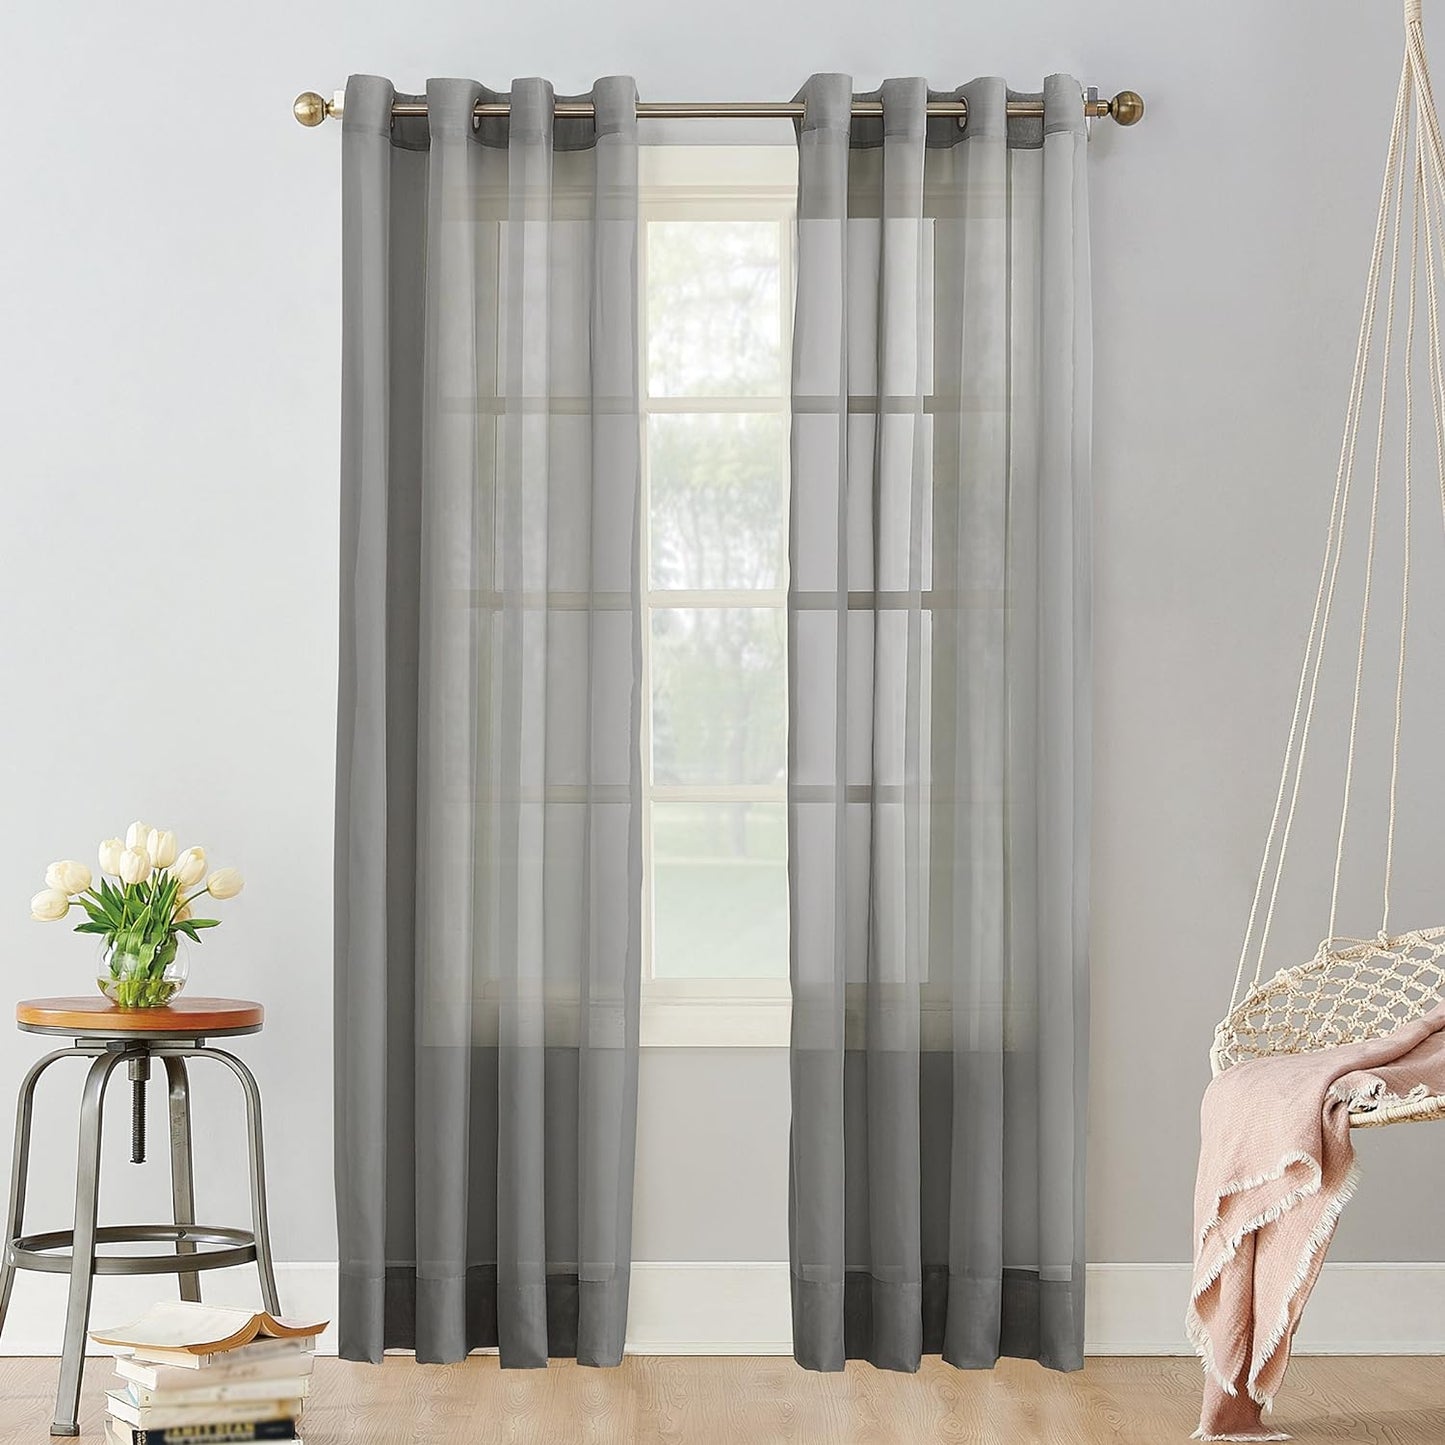 No. 918 Emily Sheer Voile Grommet Curtain Panel, 59" X 95", White  No. 918 Charcoal Gray Curtain Panel 59" X 95"